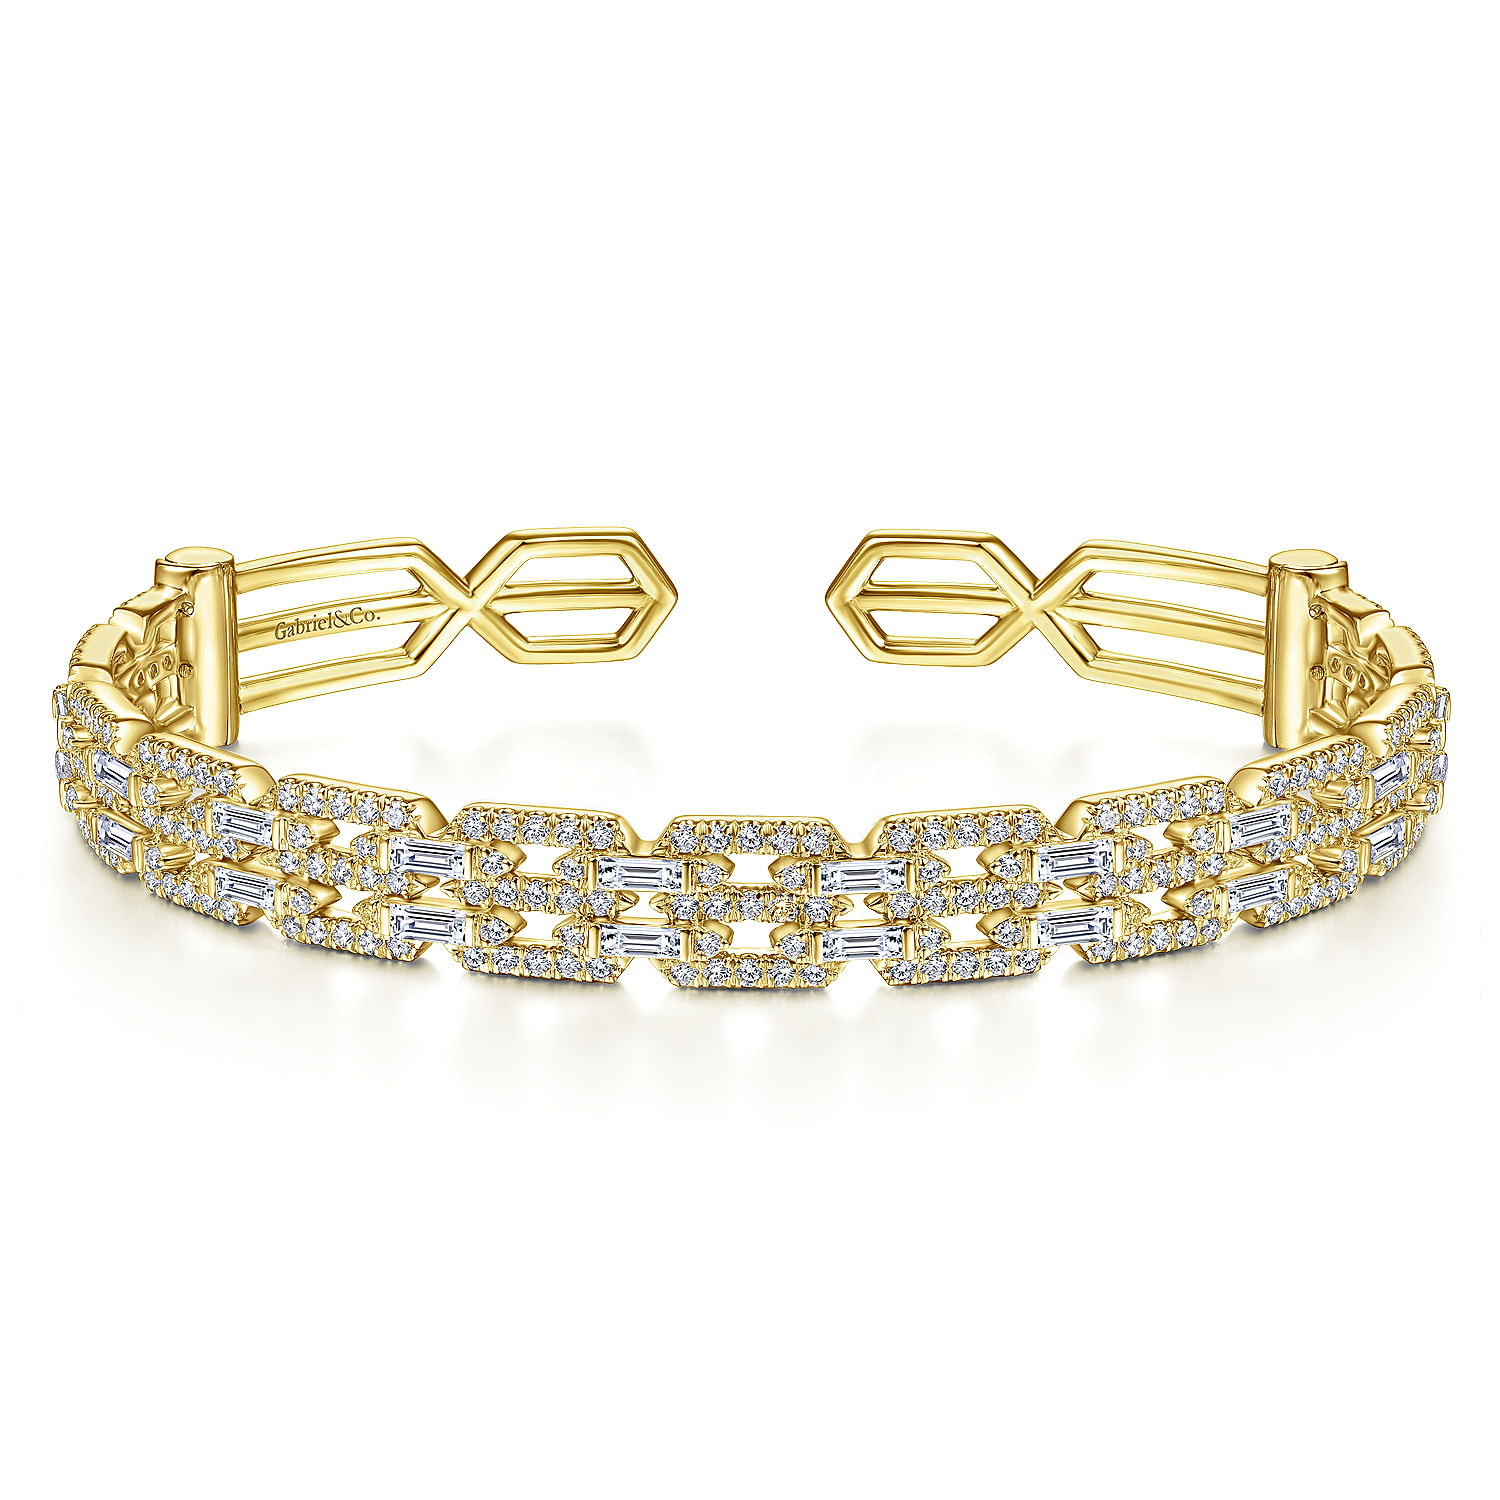 14K Yellow Gold Diamond Chain Link Cuff Bracelet with Diamond Baguette Spacers